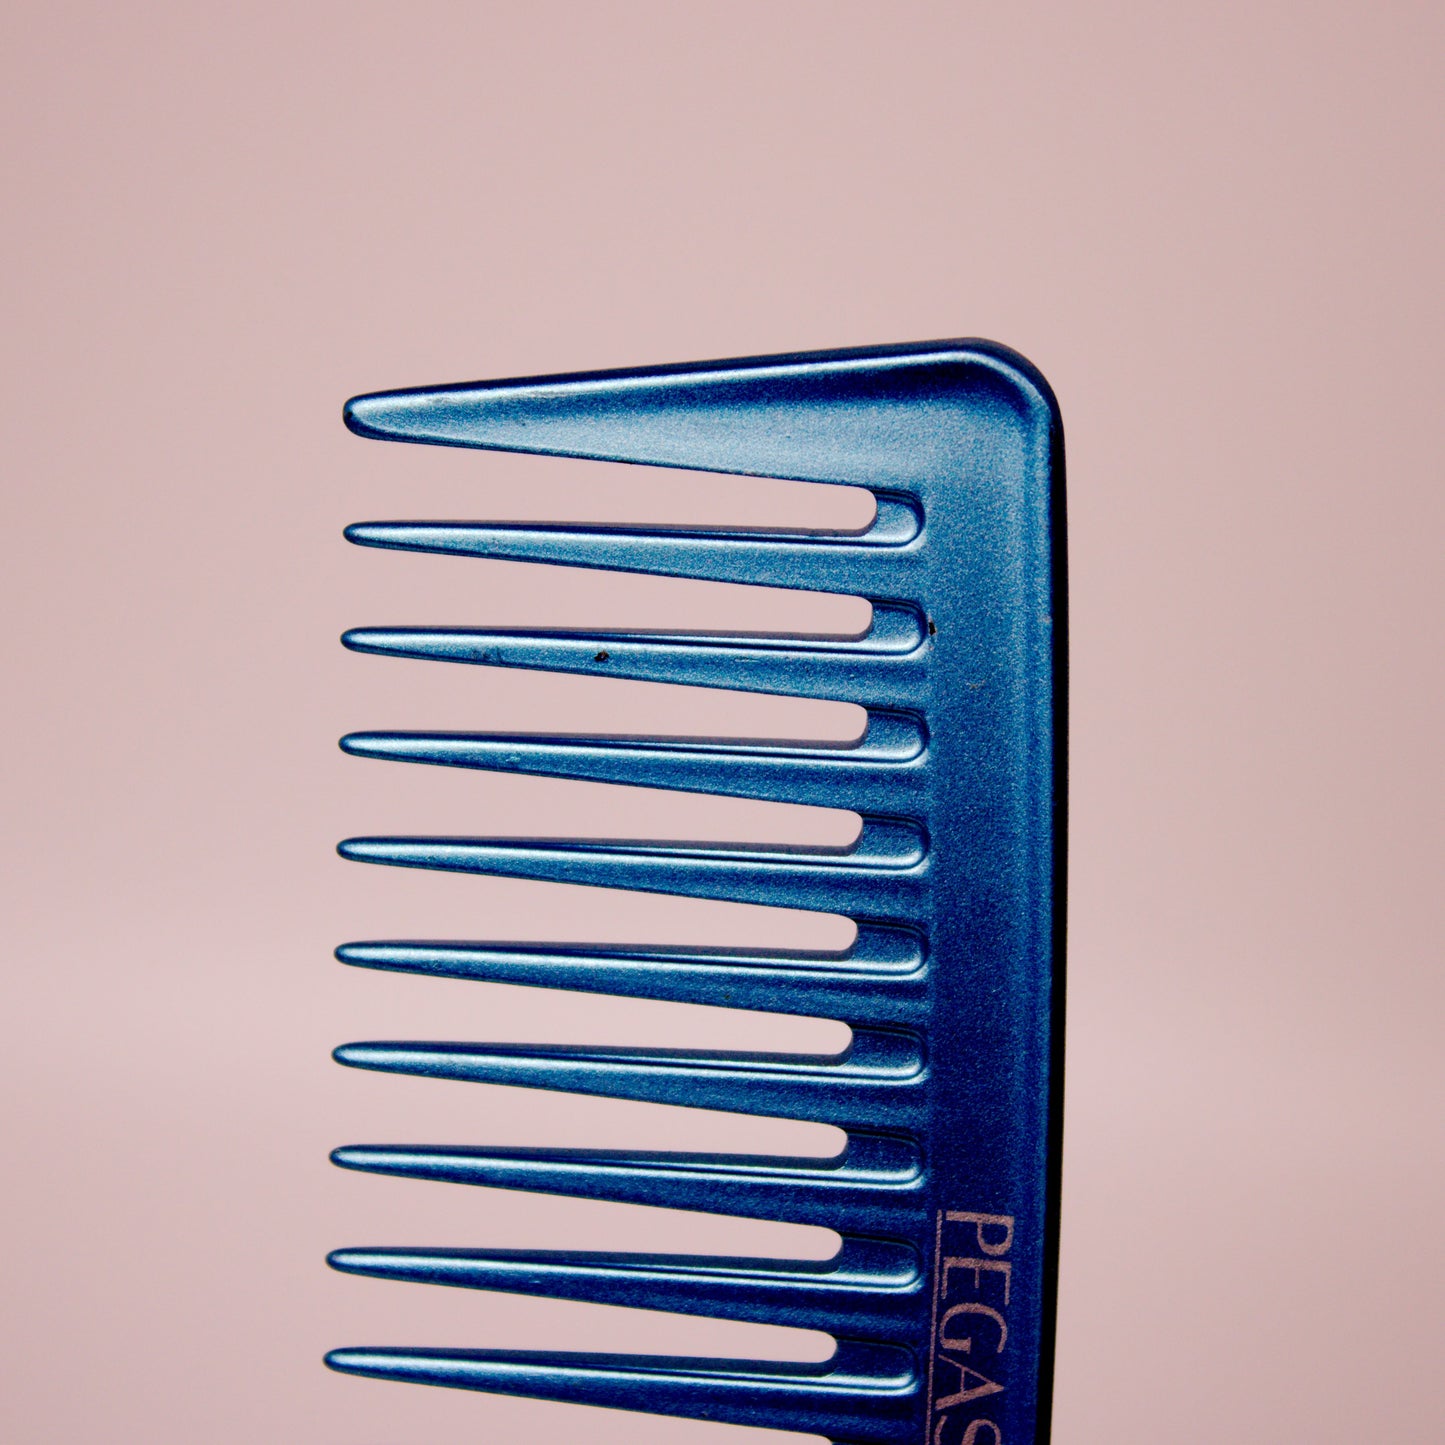 Pegasus MICOLOR 404, 7in Hard Rubber Wide Tooth Tall Styling Comb, Handmade, Seamless, Smooth Edges, Anti Static, Heat and Chemically Resistant, Wet Hair, Everyday Grooming Comb | Peines de goma dura - Blue